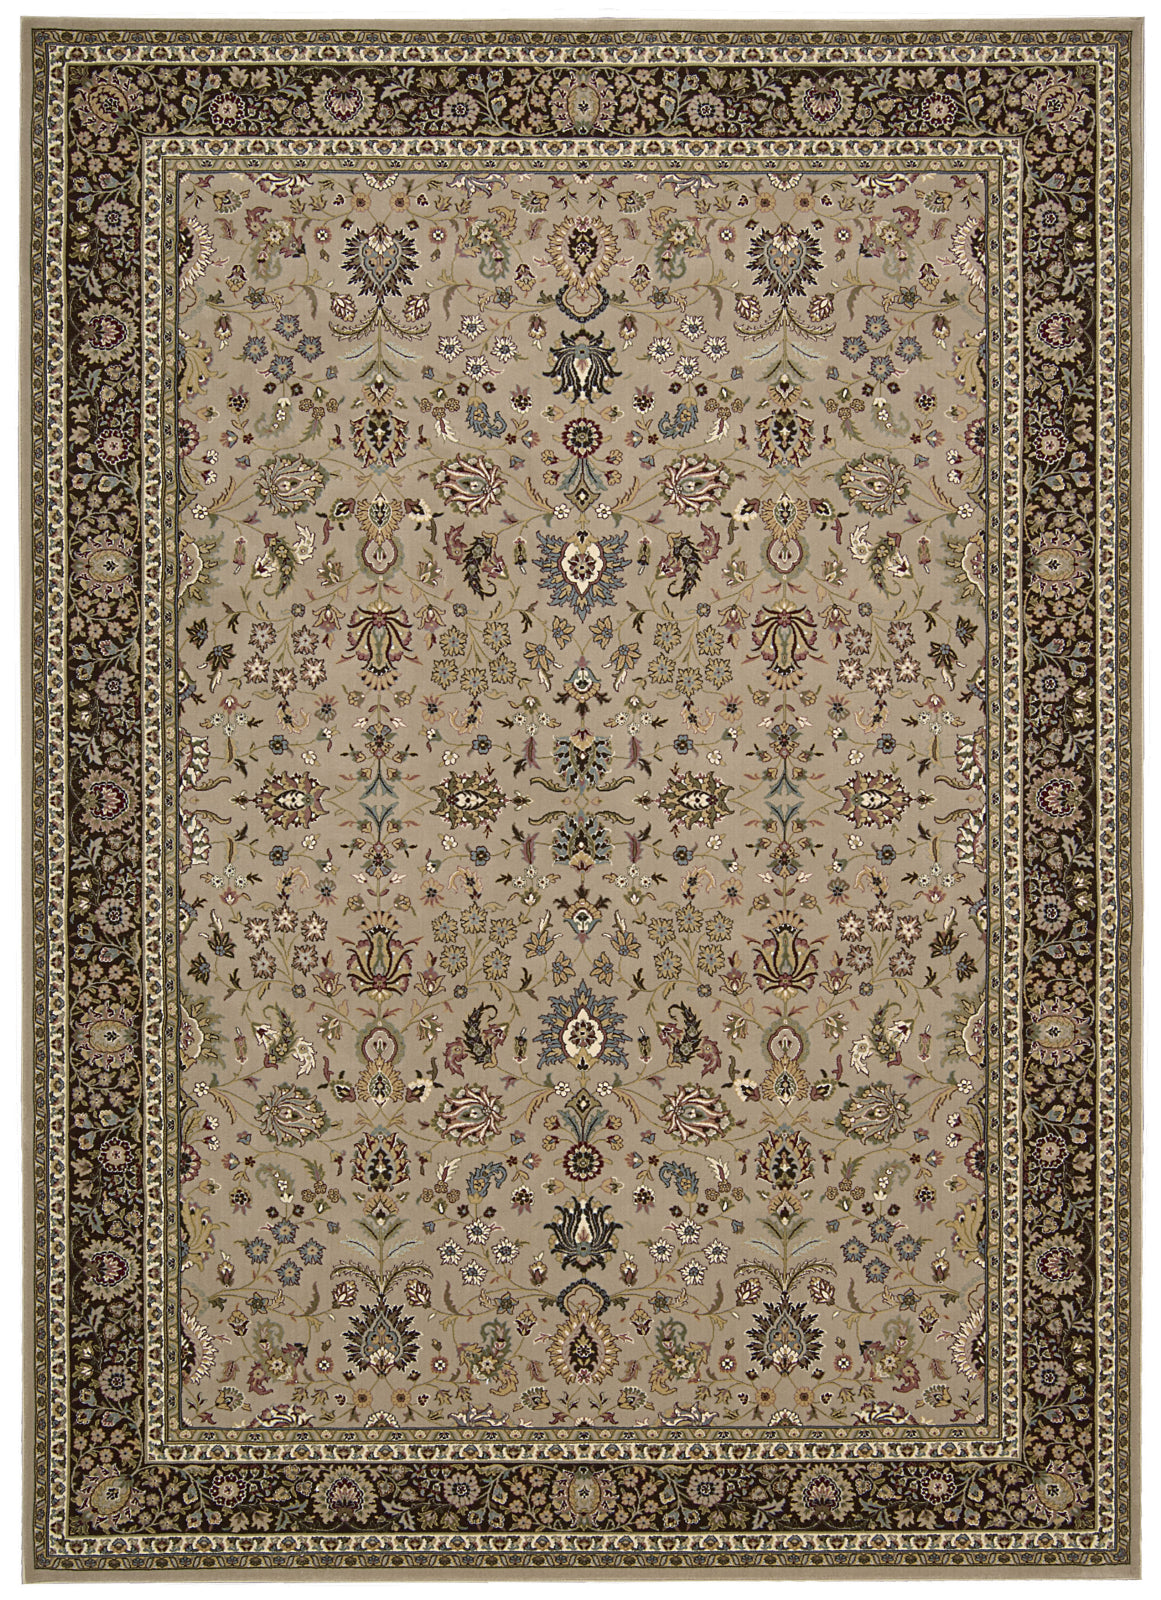 Nourison Antiquities ANT04 Royal Countryside Cream Area Rug by Kathy Ireland main image